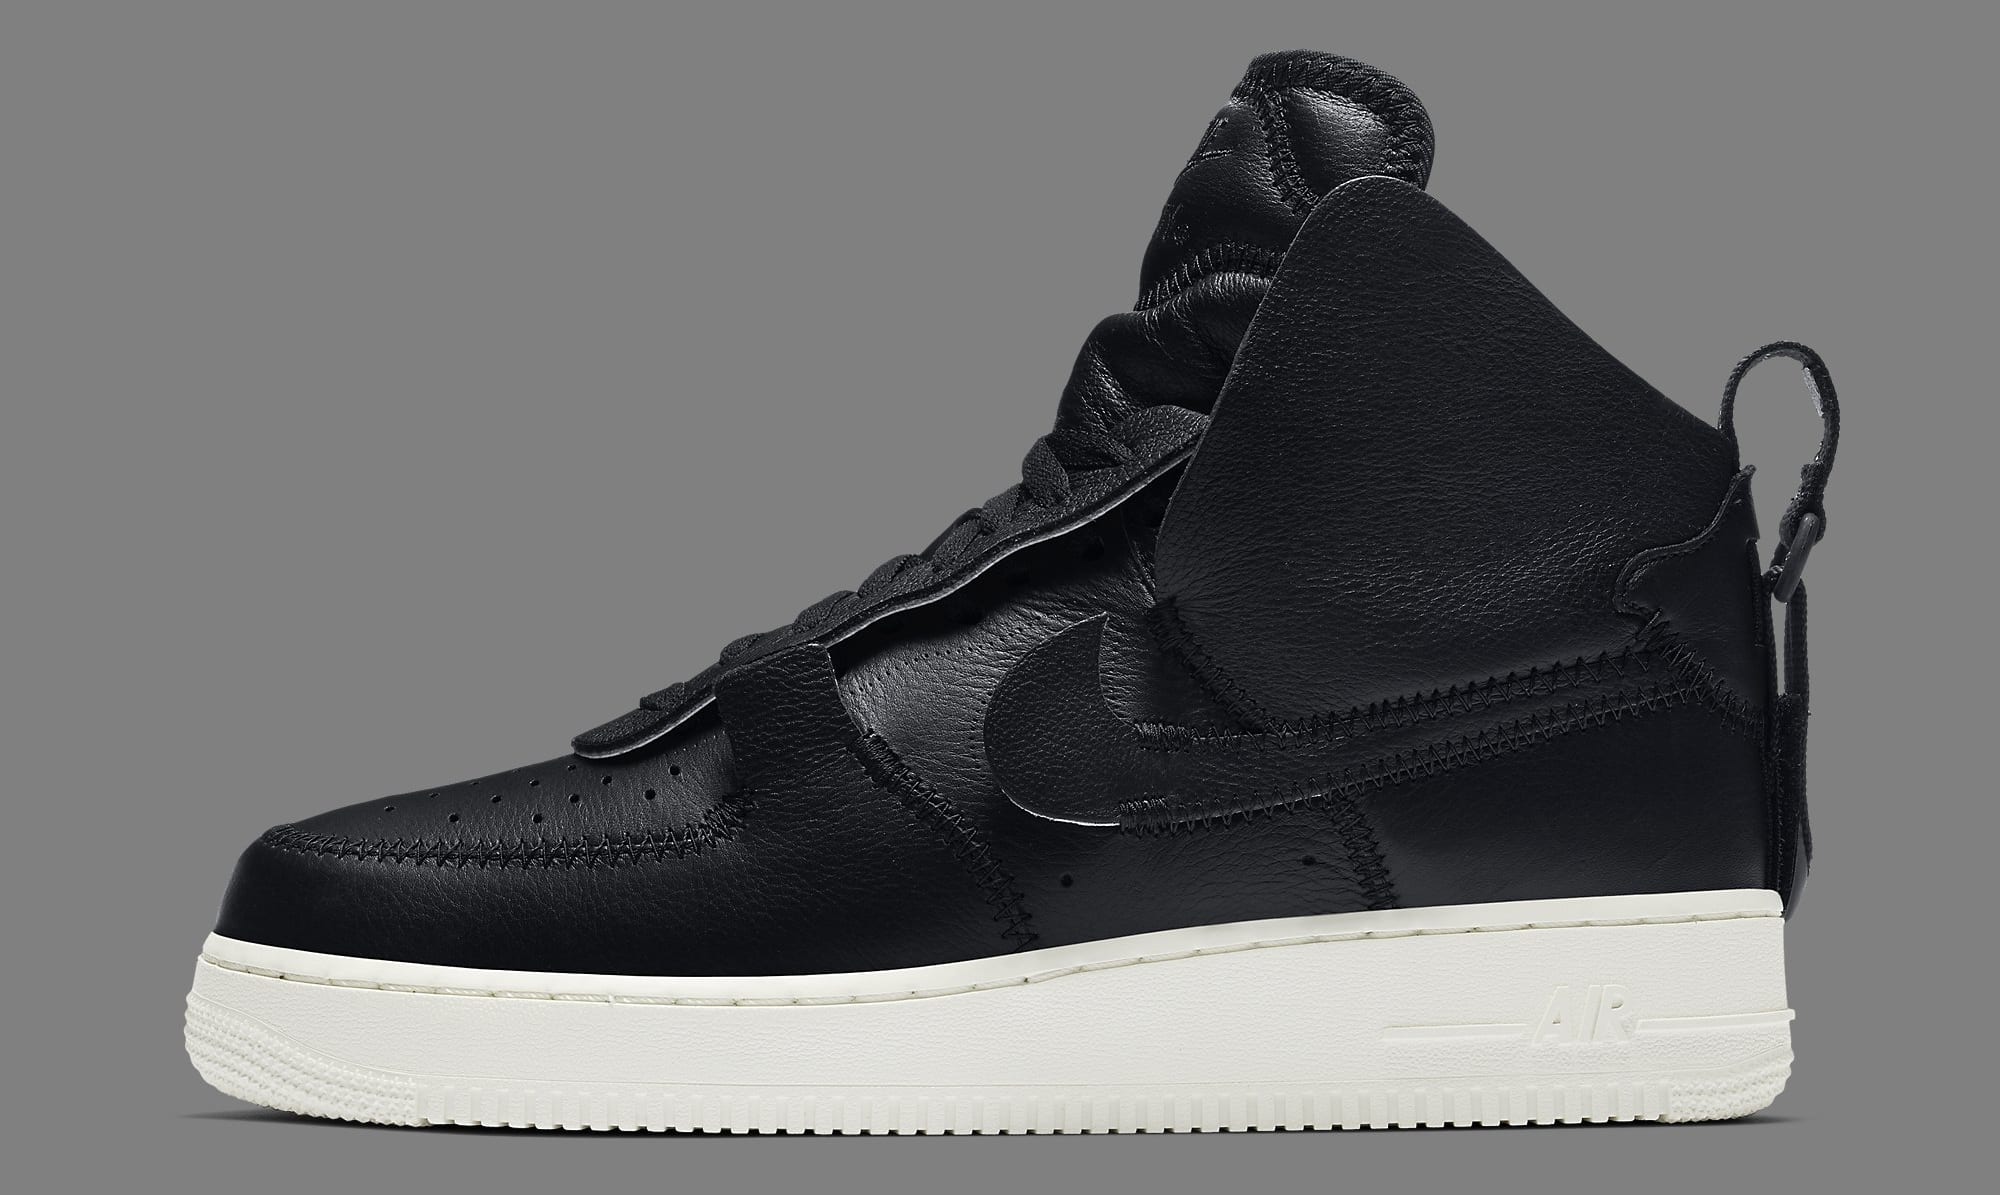 PSNY x Nike Air Force 1 AO9292-002 Lateral